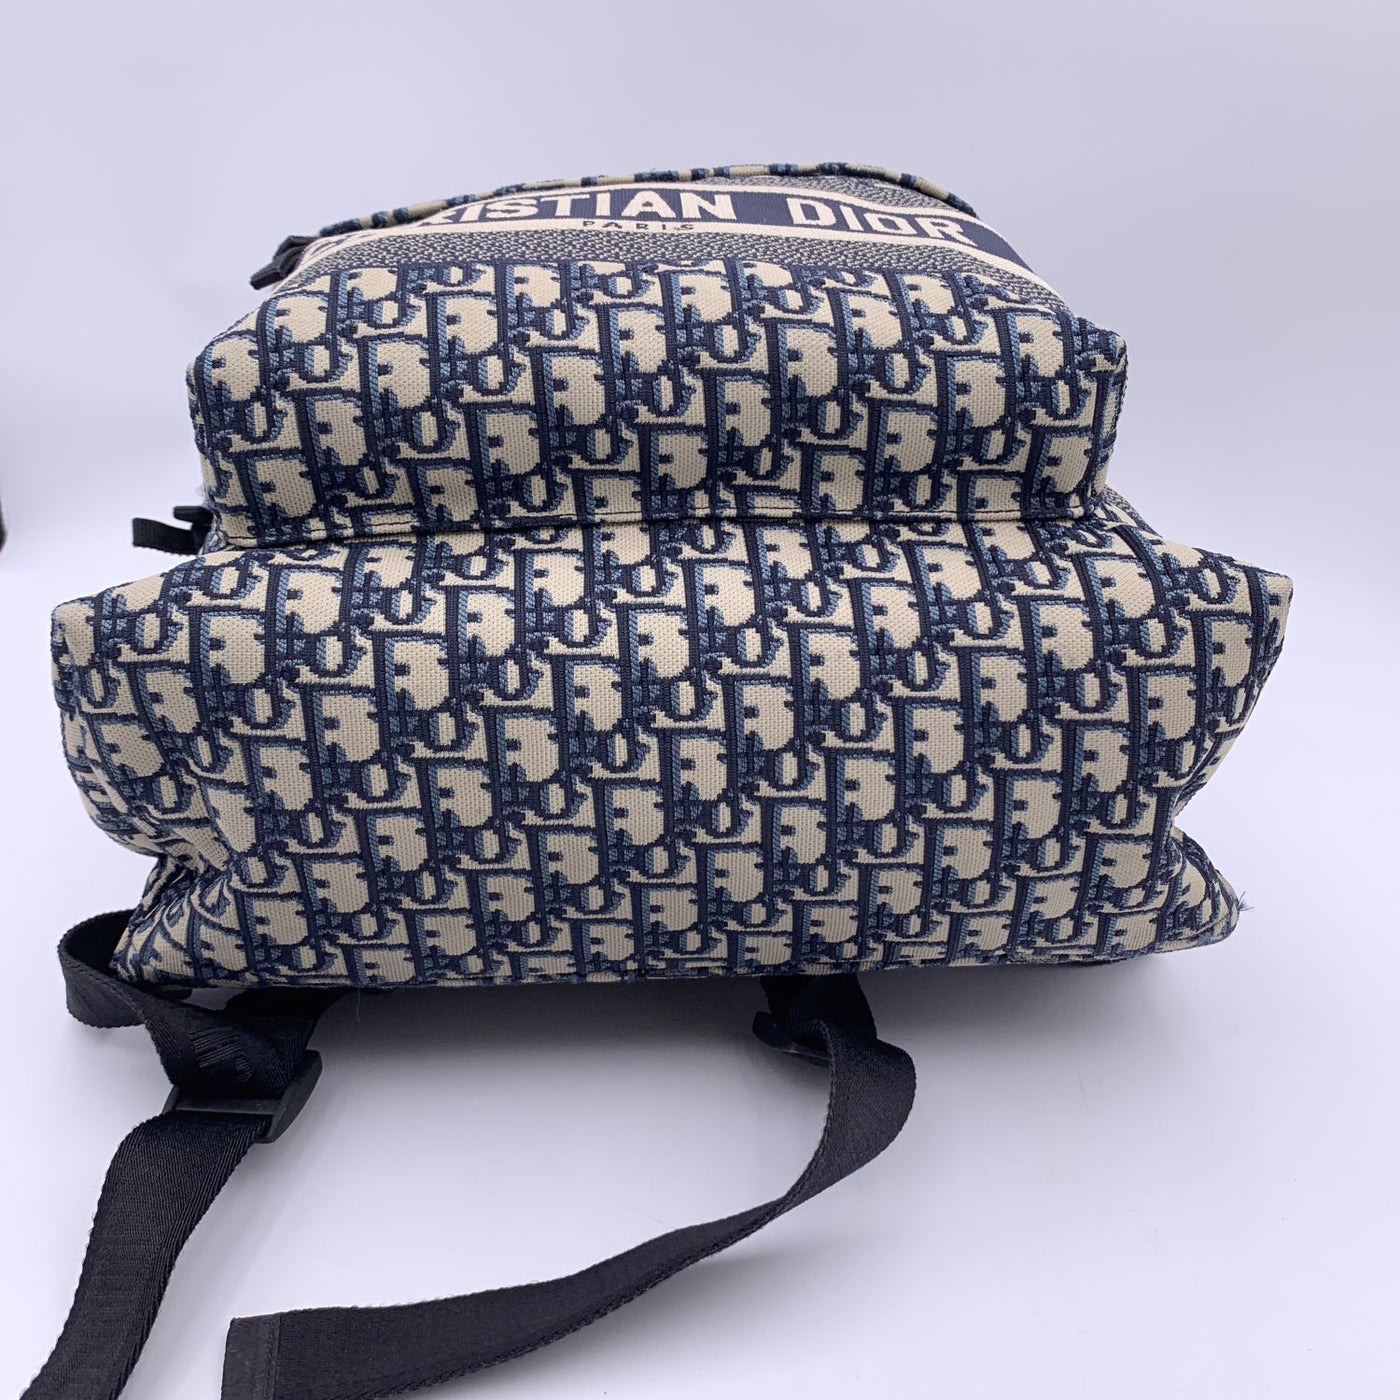 Dior Diortravel Backpack in Blue Dior Oblique Technical Jacquard